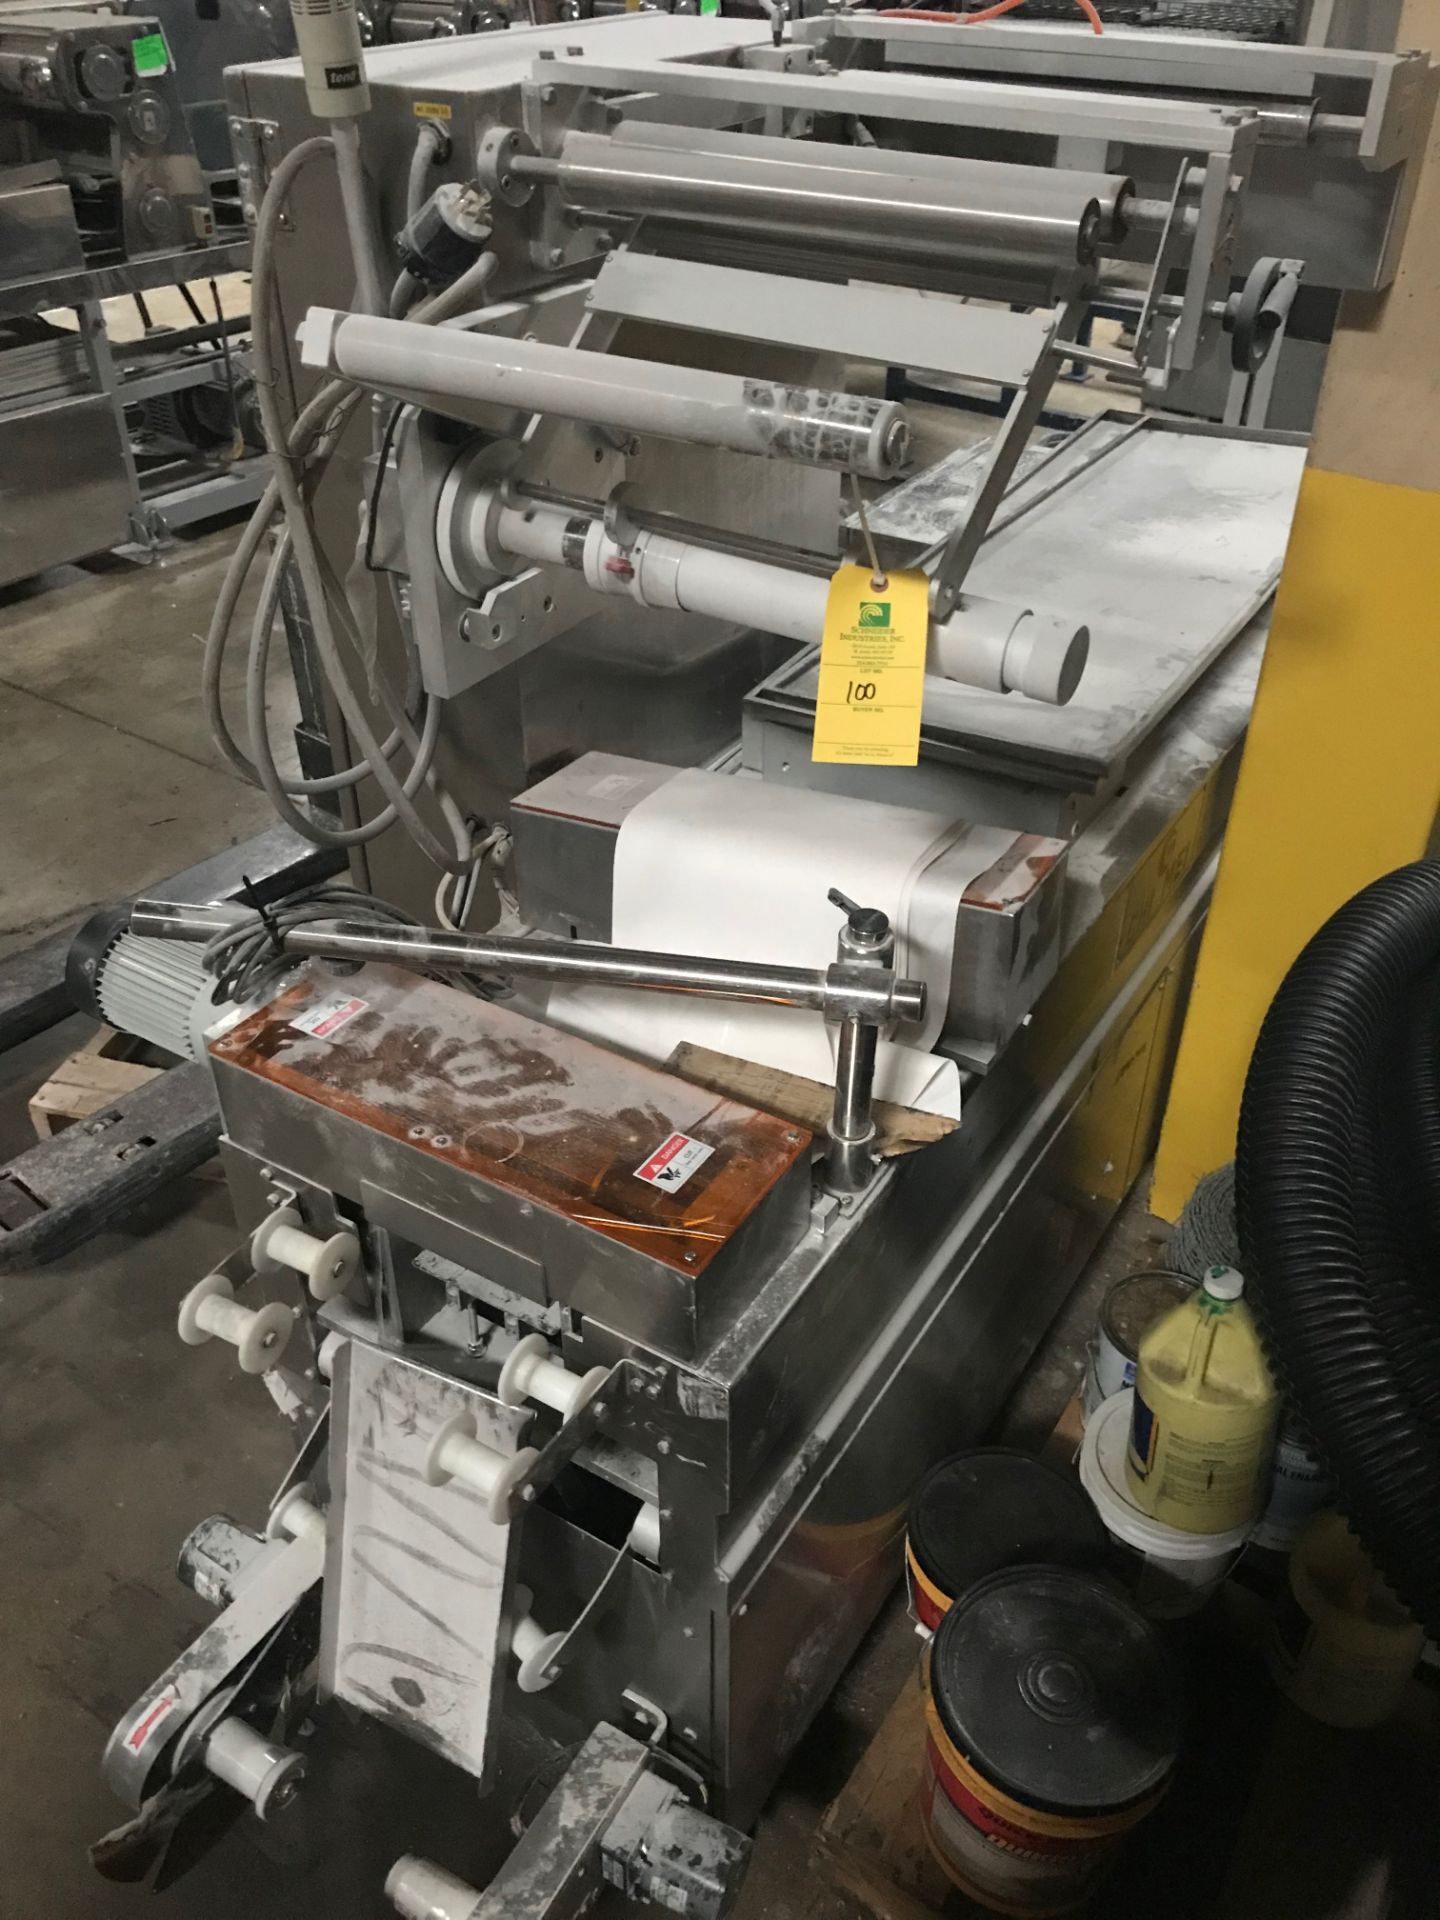 Chei Mei Automatic Packaging Machine, Serial# 14951, 220 Volts, 60 Hz - Image 3 of 6